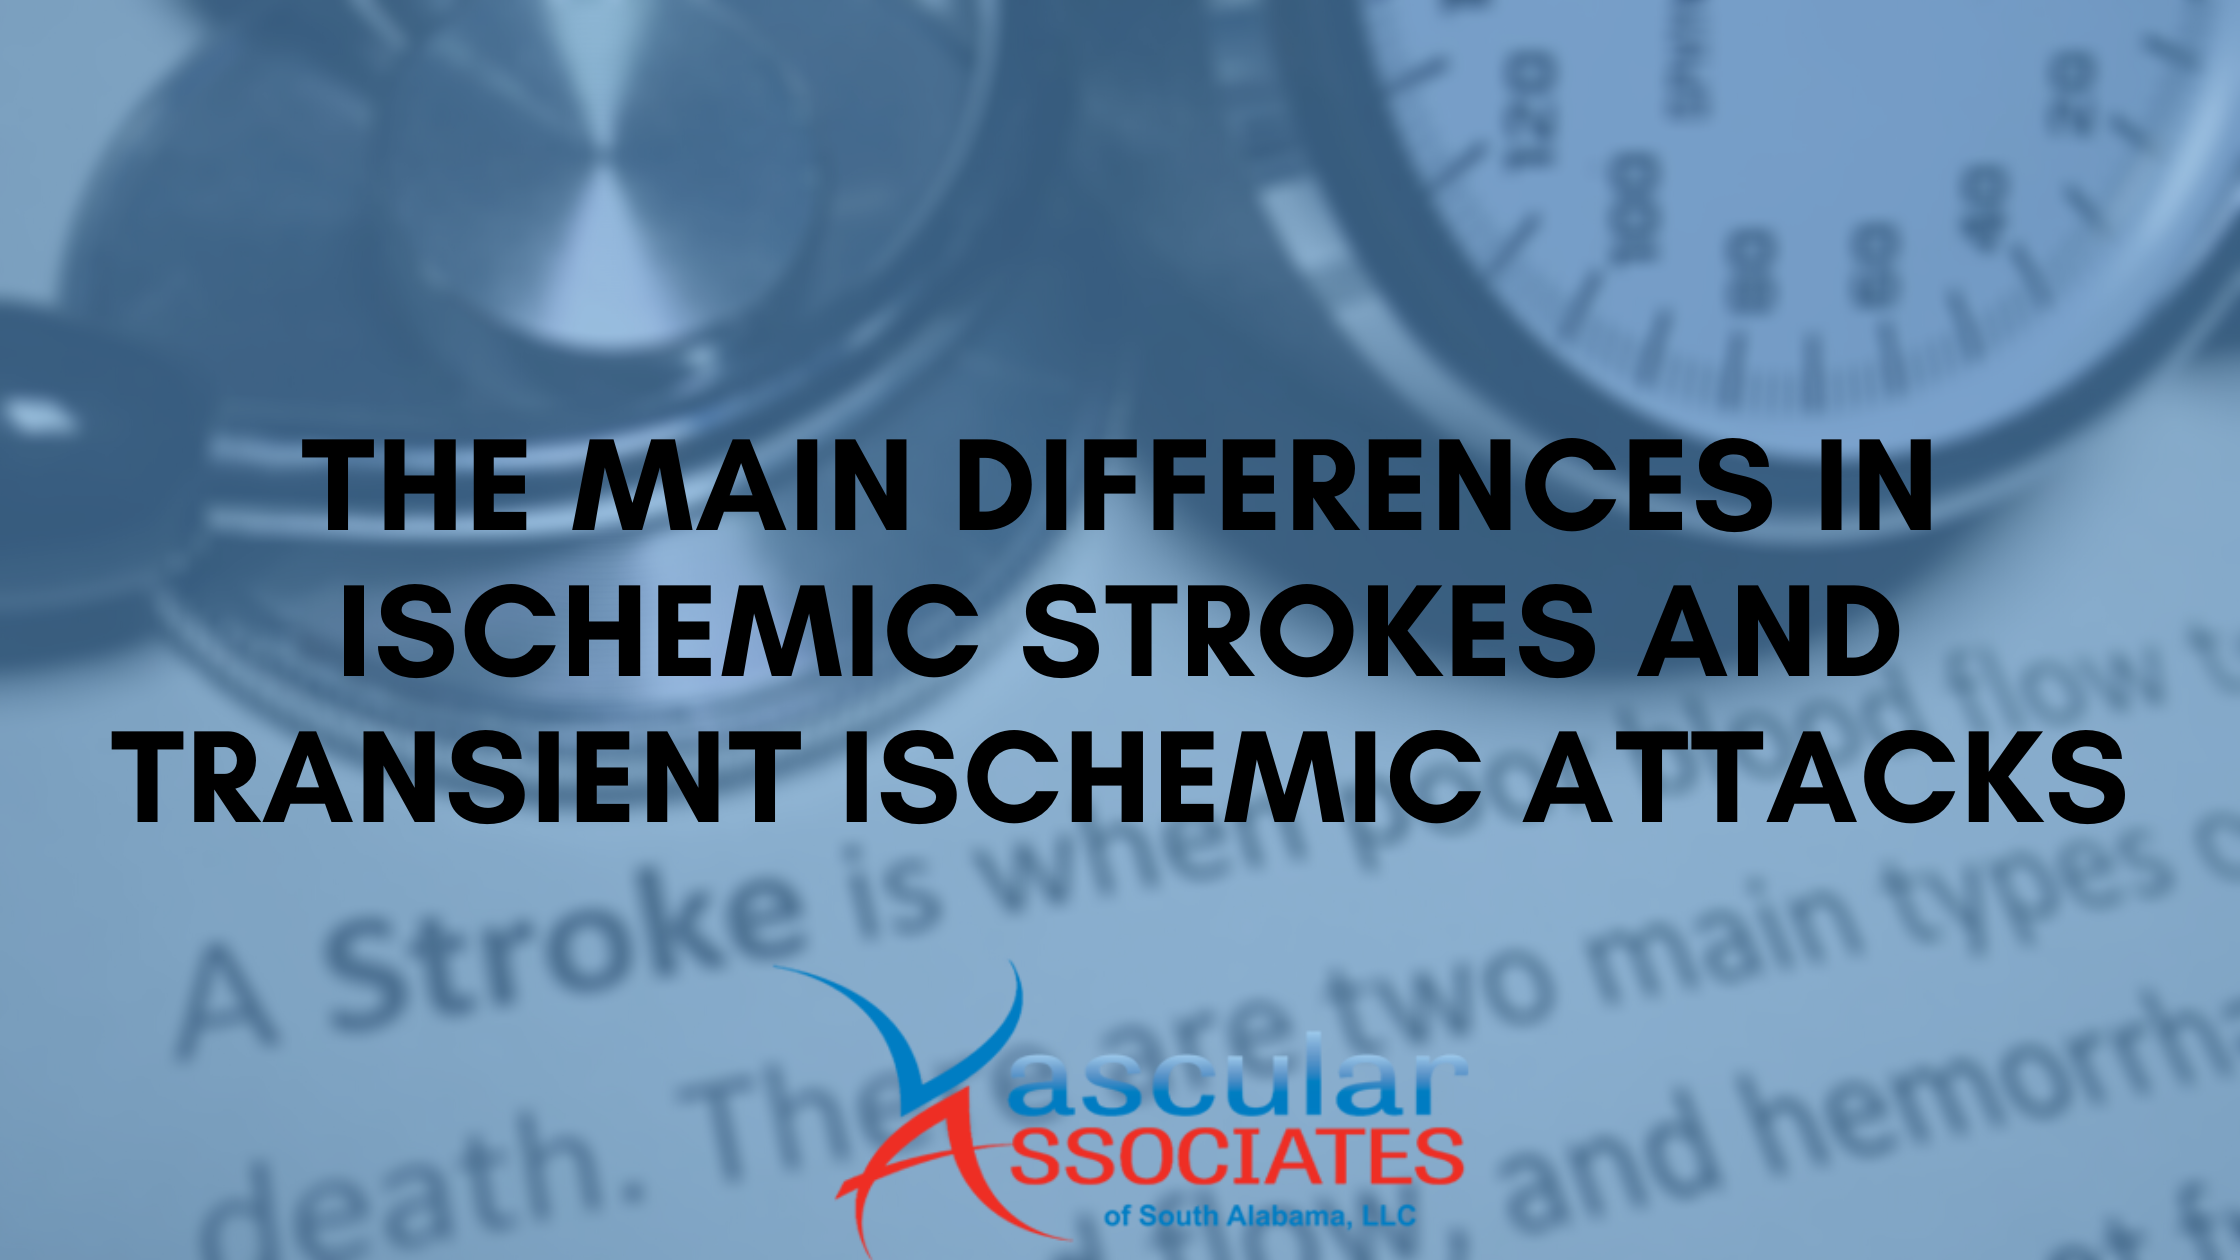 The Main Differences in Ischemic Strokes and Transient Ischemic Attacks.png